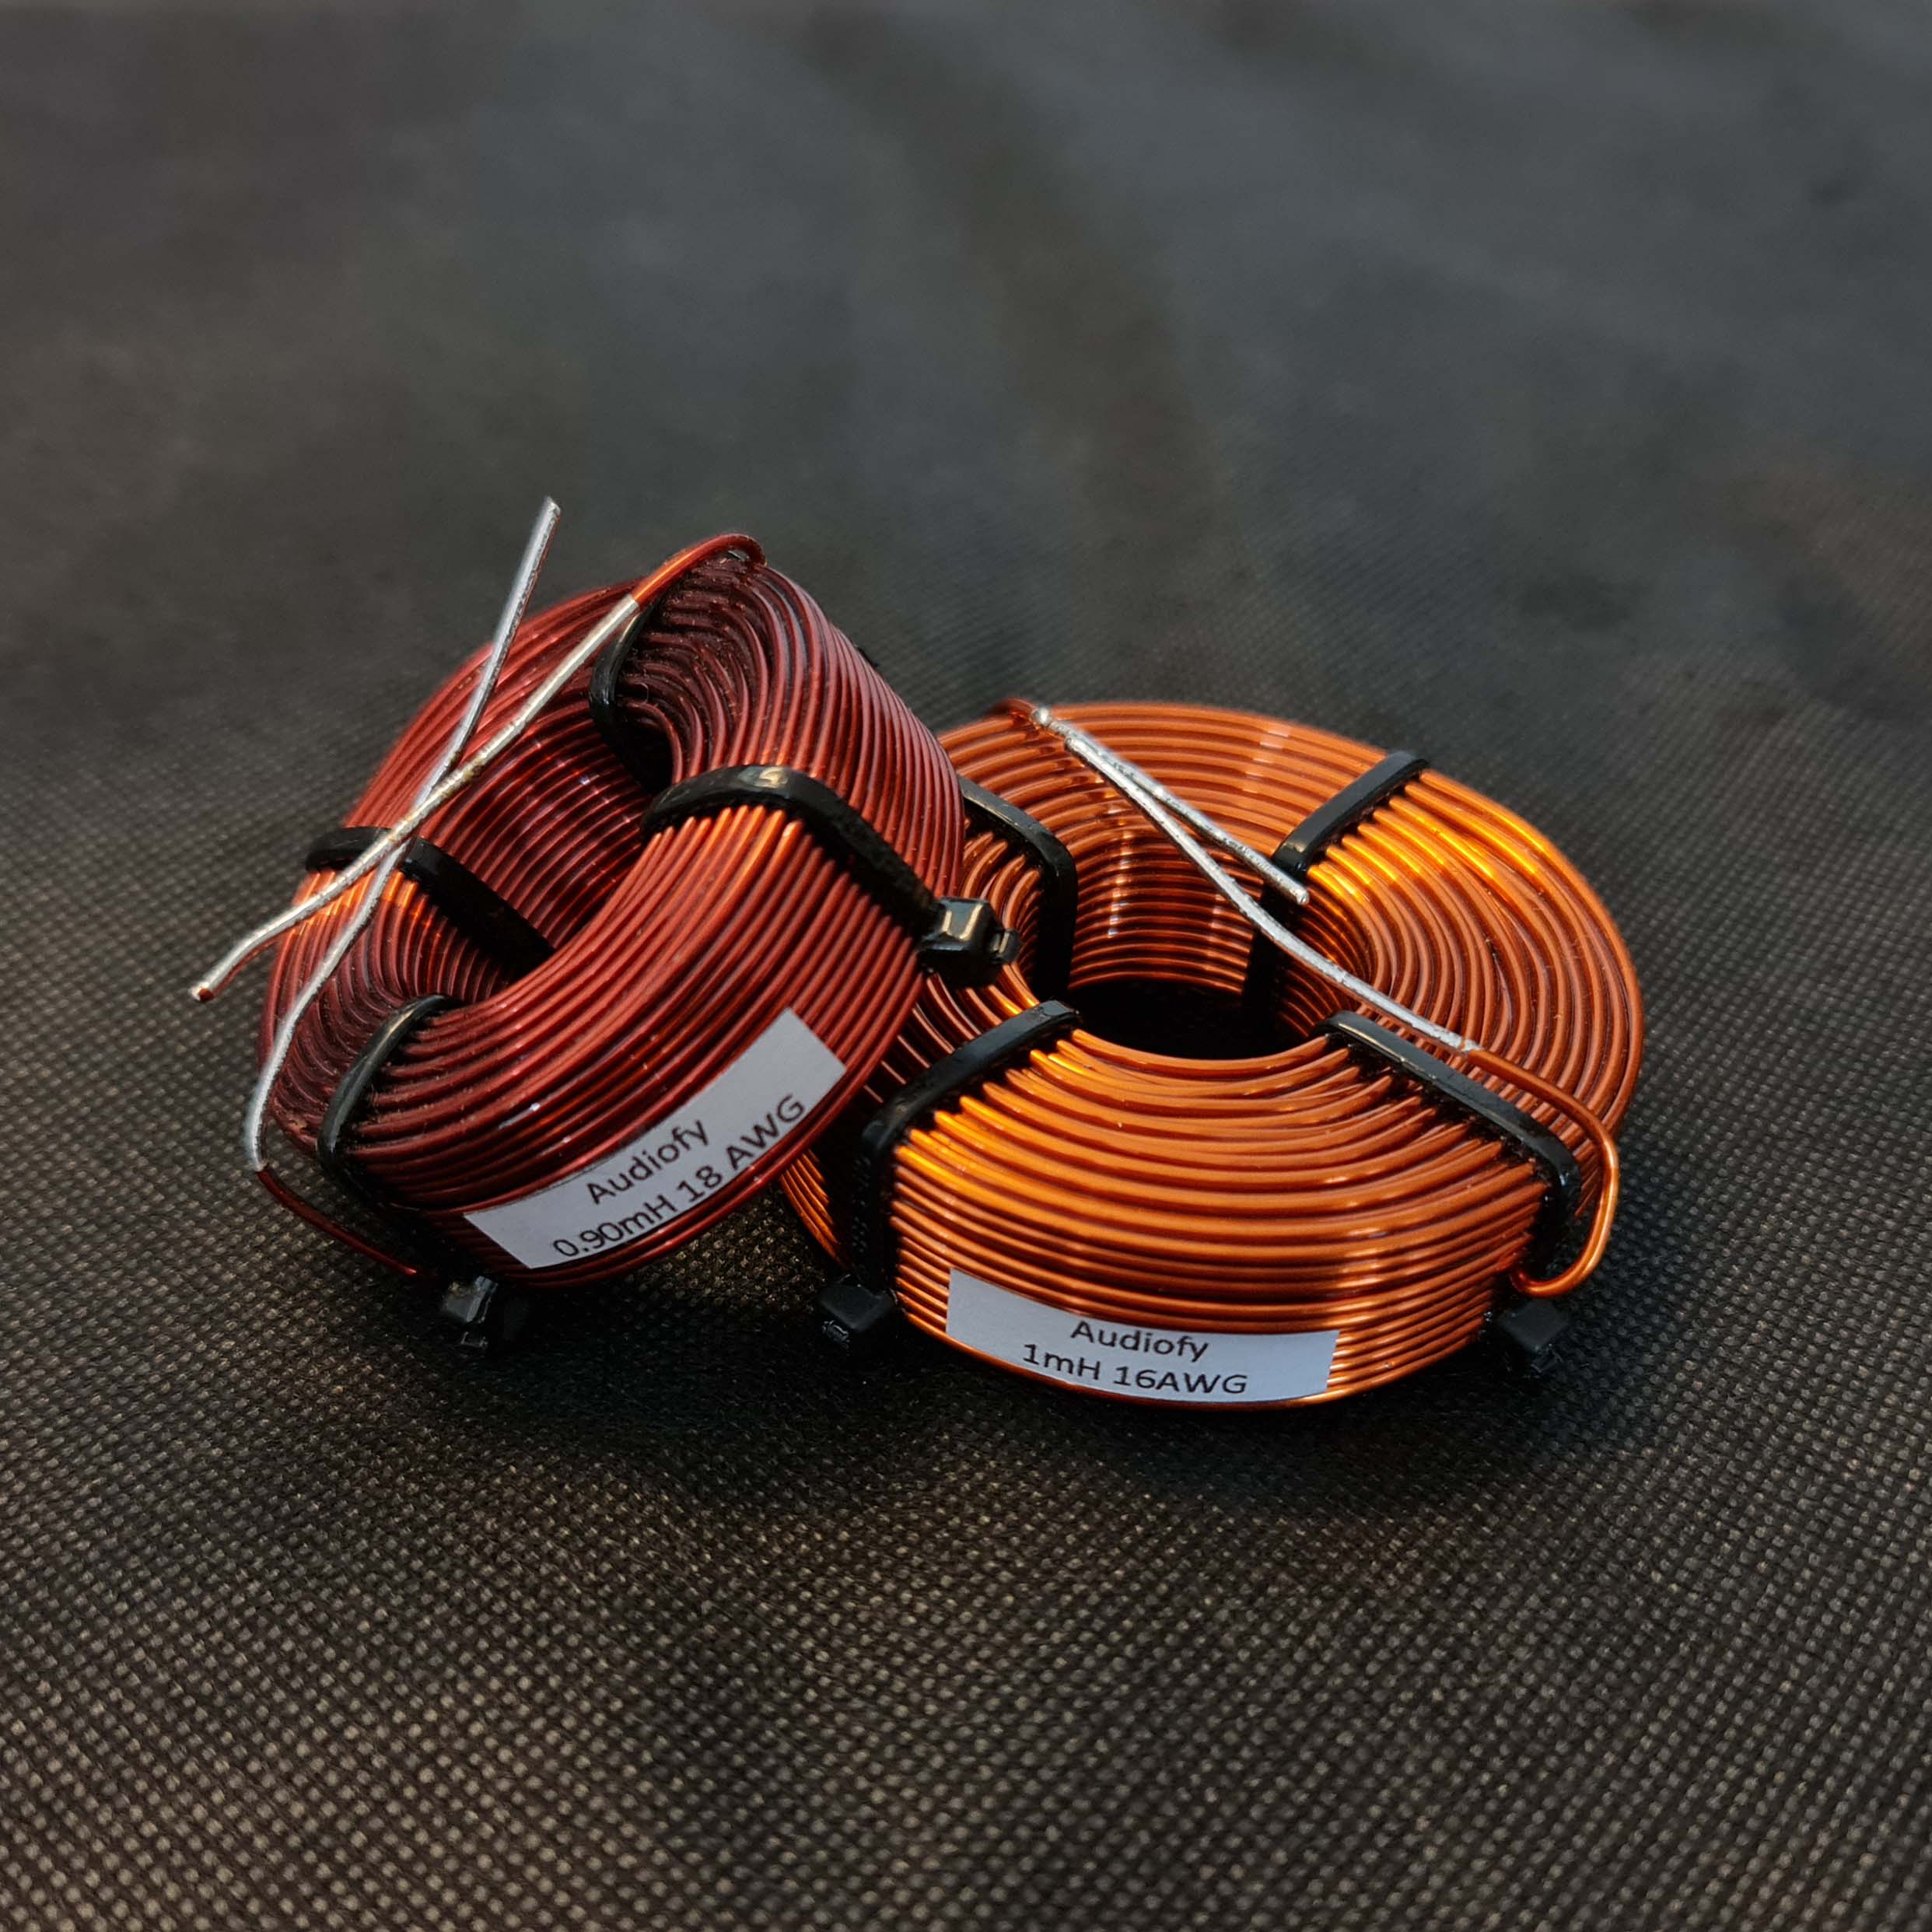 Audiofy 0.50mH 18 AWG Air Core Crossover Inductor